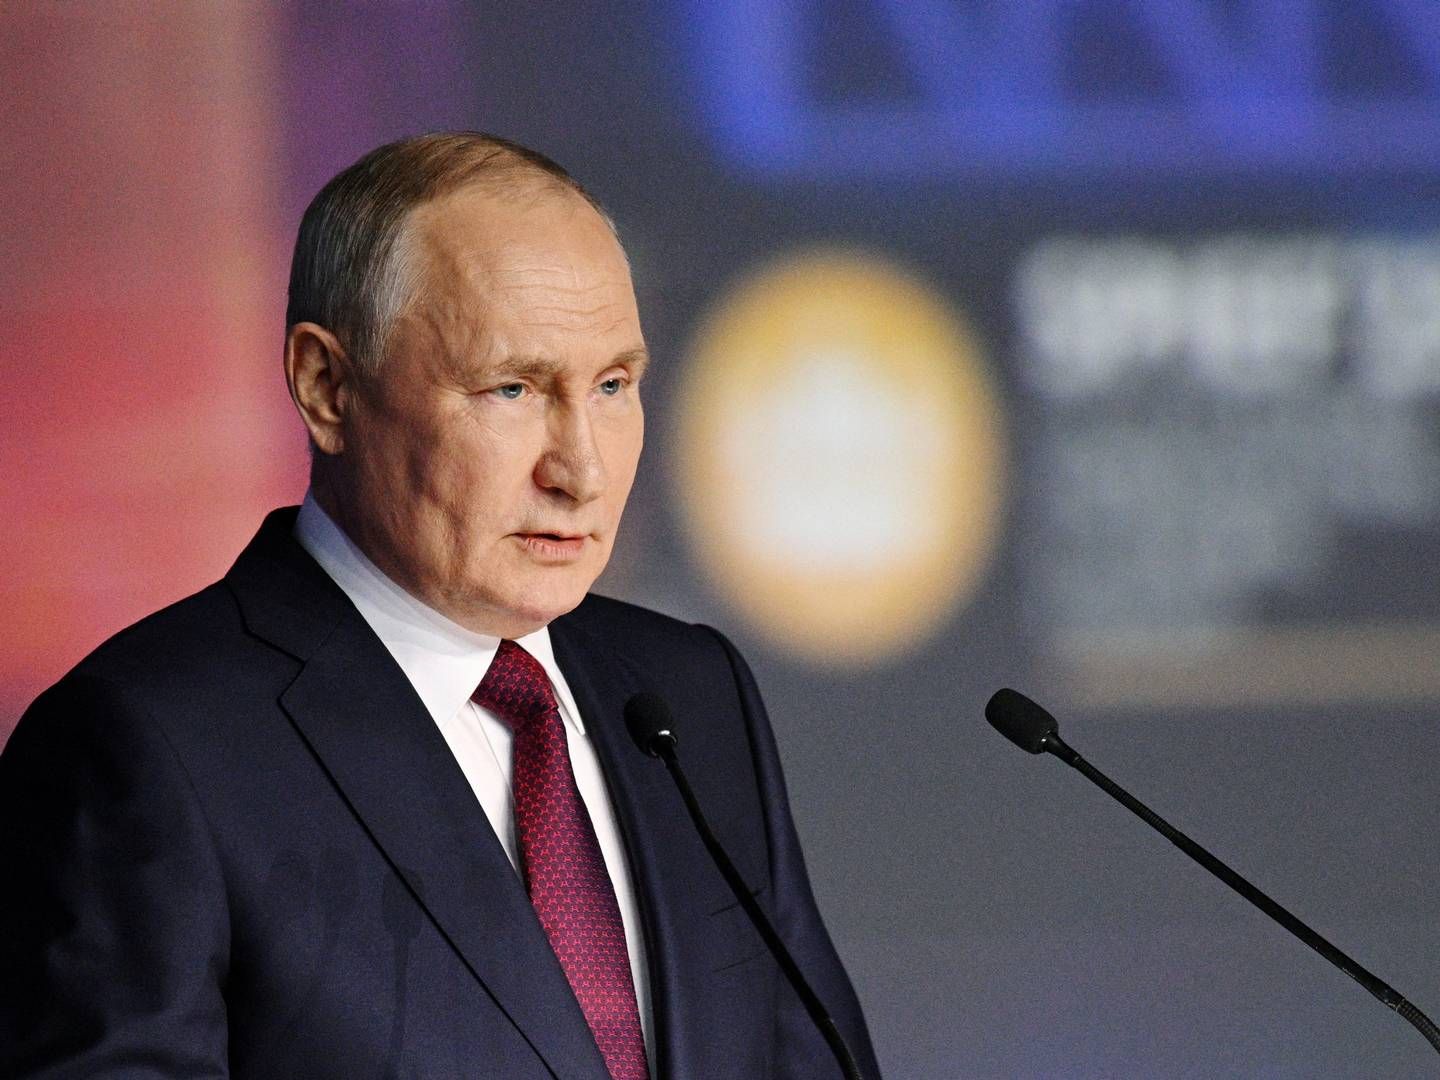 Russia, led by President Vladimir Putin, has announced that exports will be reduced by 500,000 barrels per day in August to support oil prices. | Photo: Host Photo Agency Ria Novosti/Reuters/Ritzau Scanpix